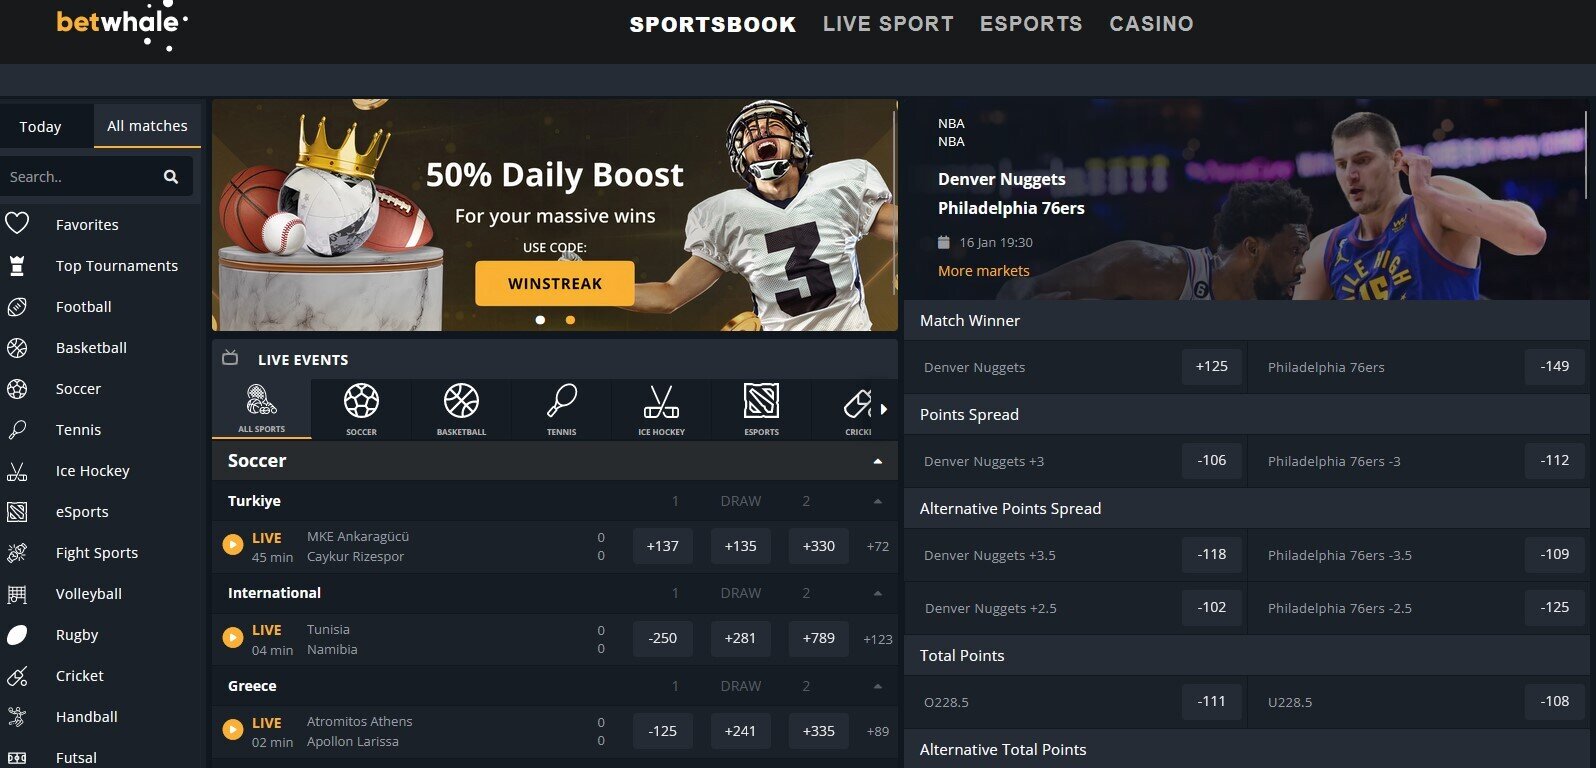 BetWhale Sports Betting